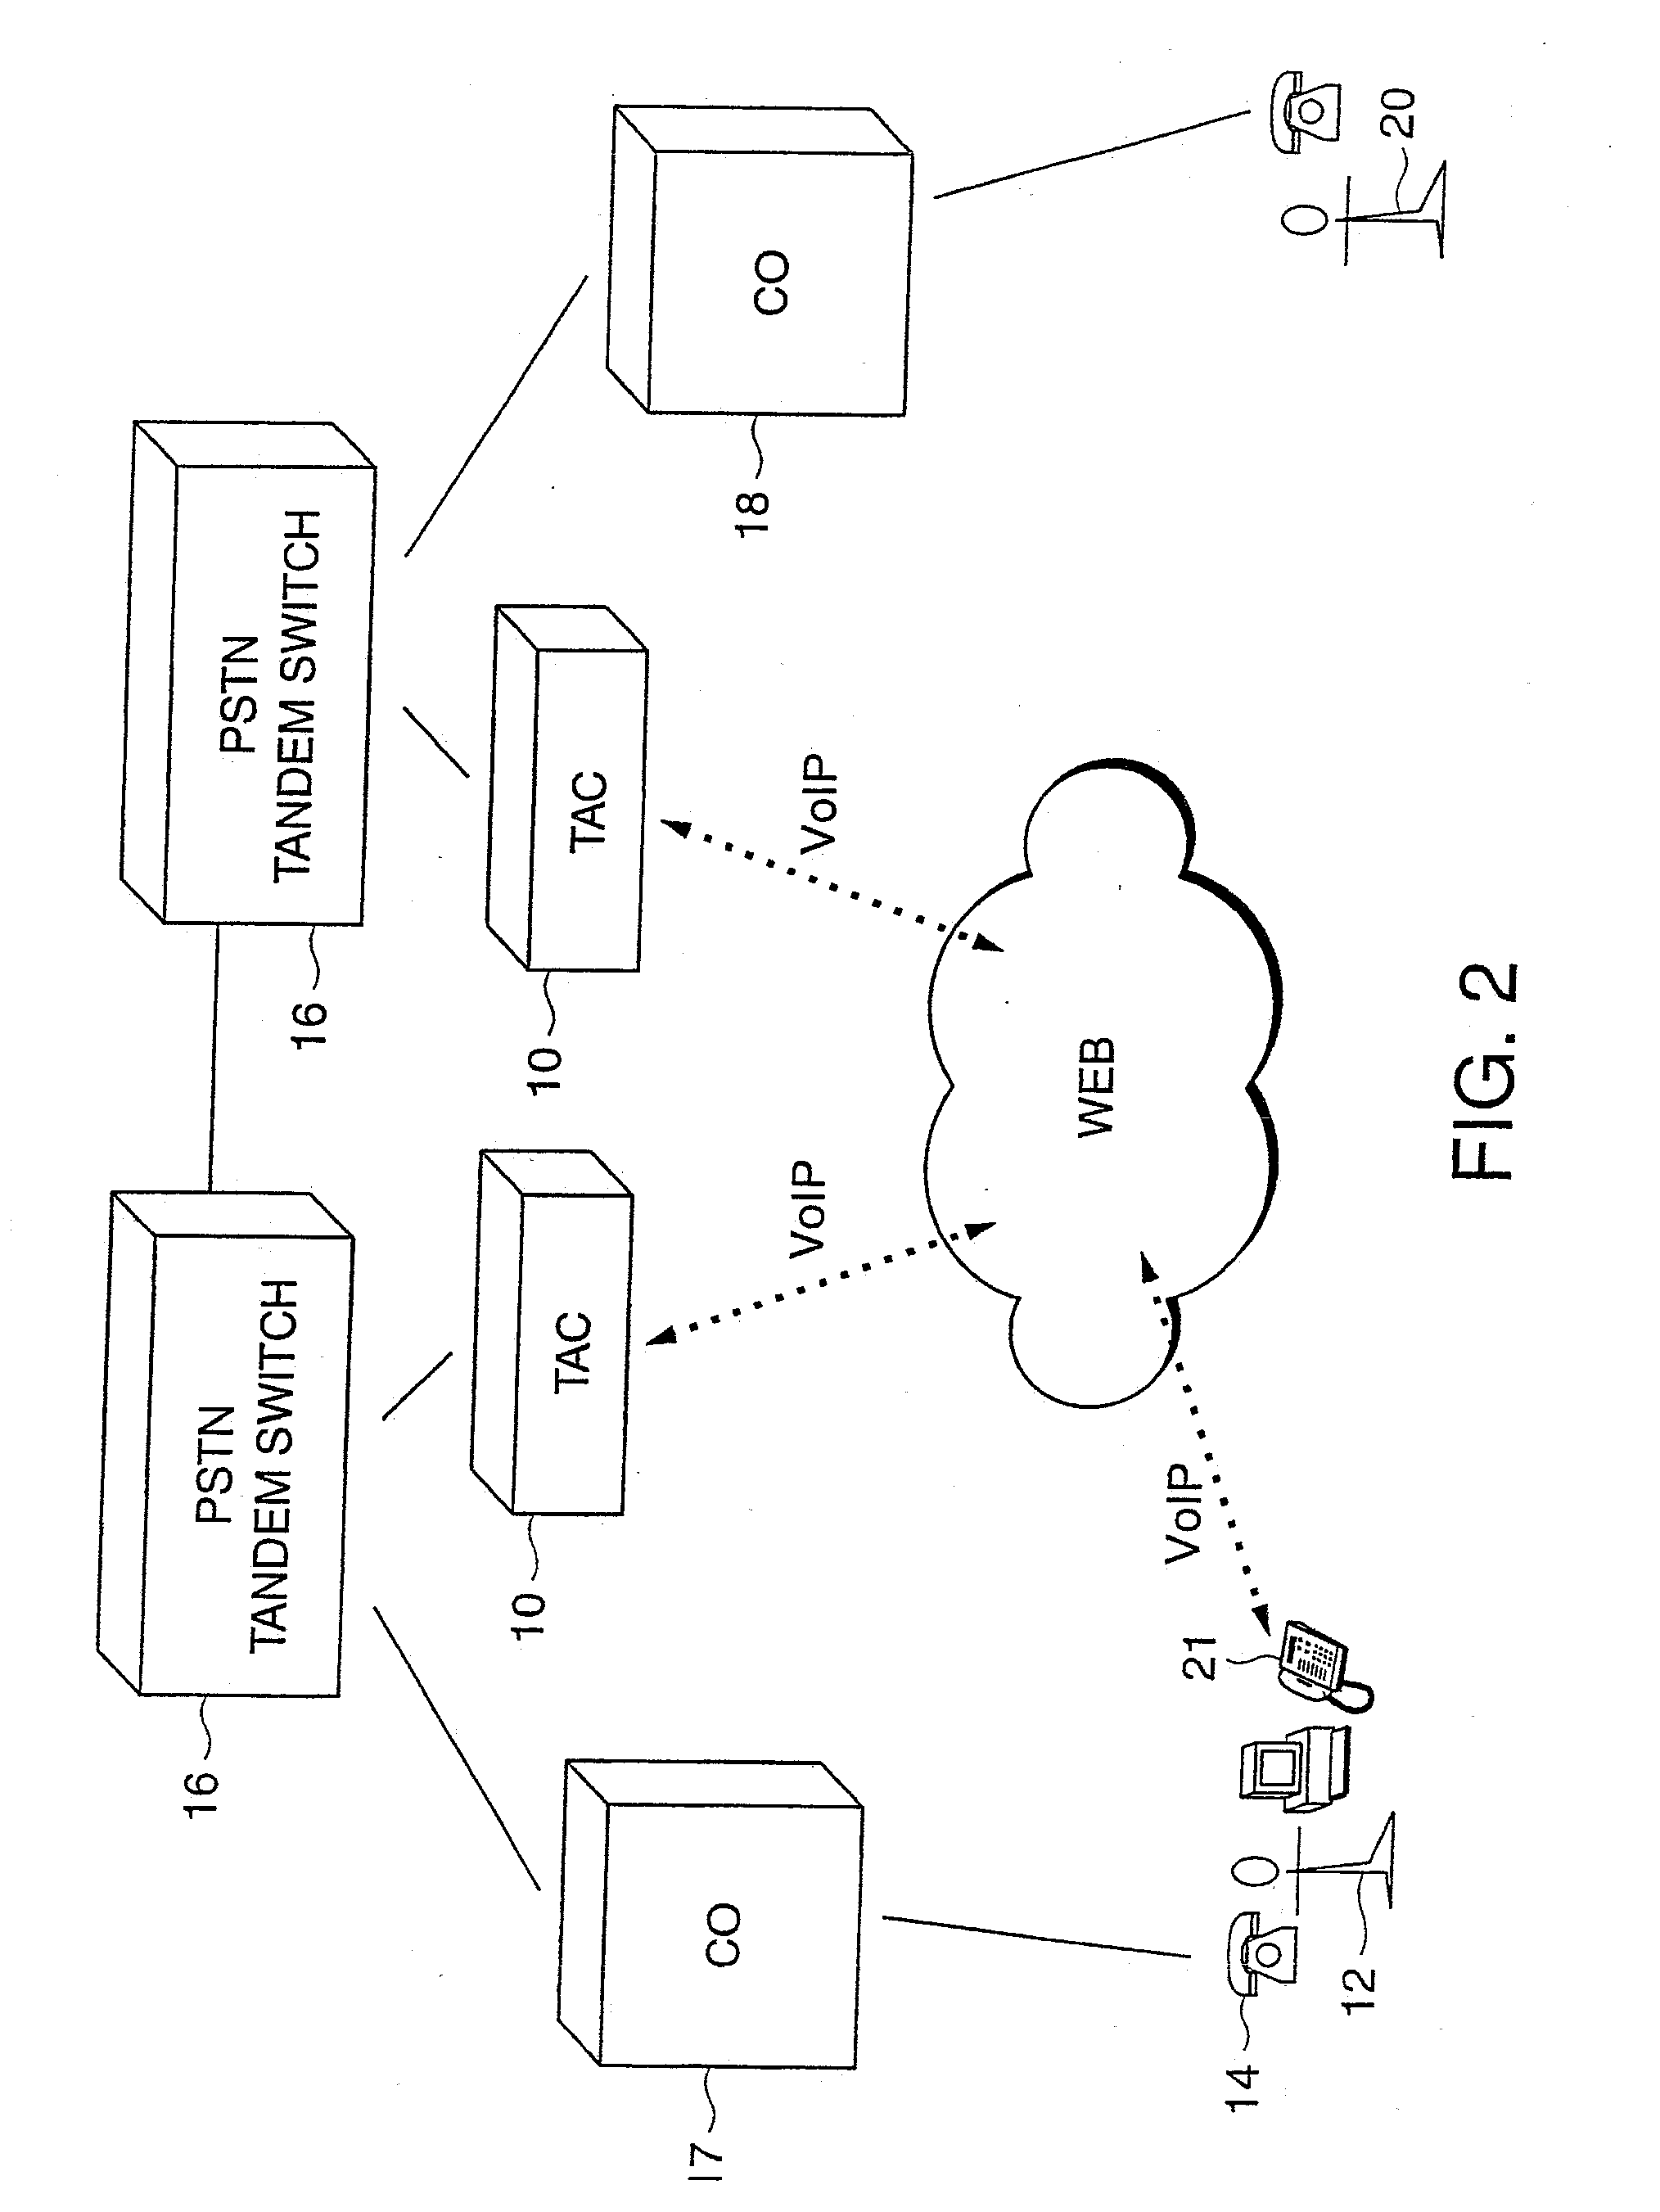 Branch calling and caller id based call routing telephone features